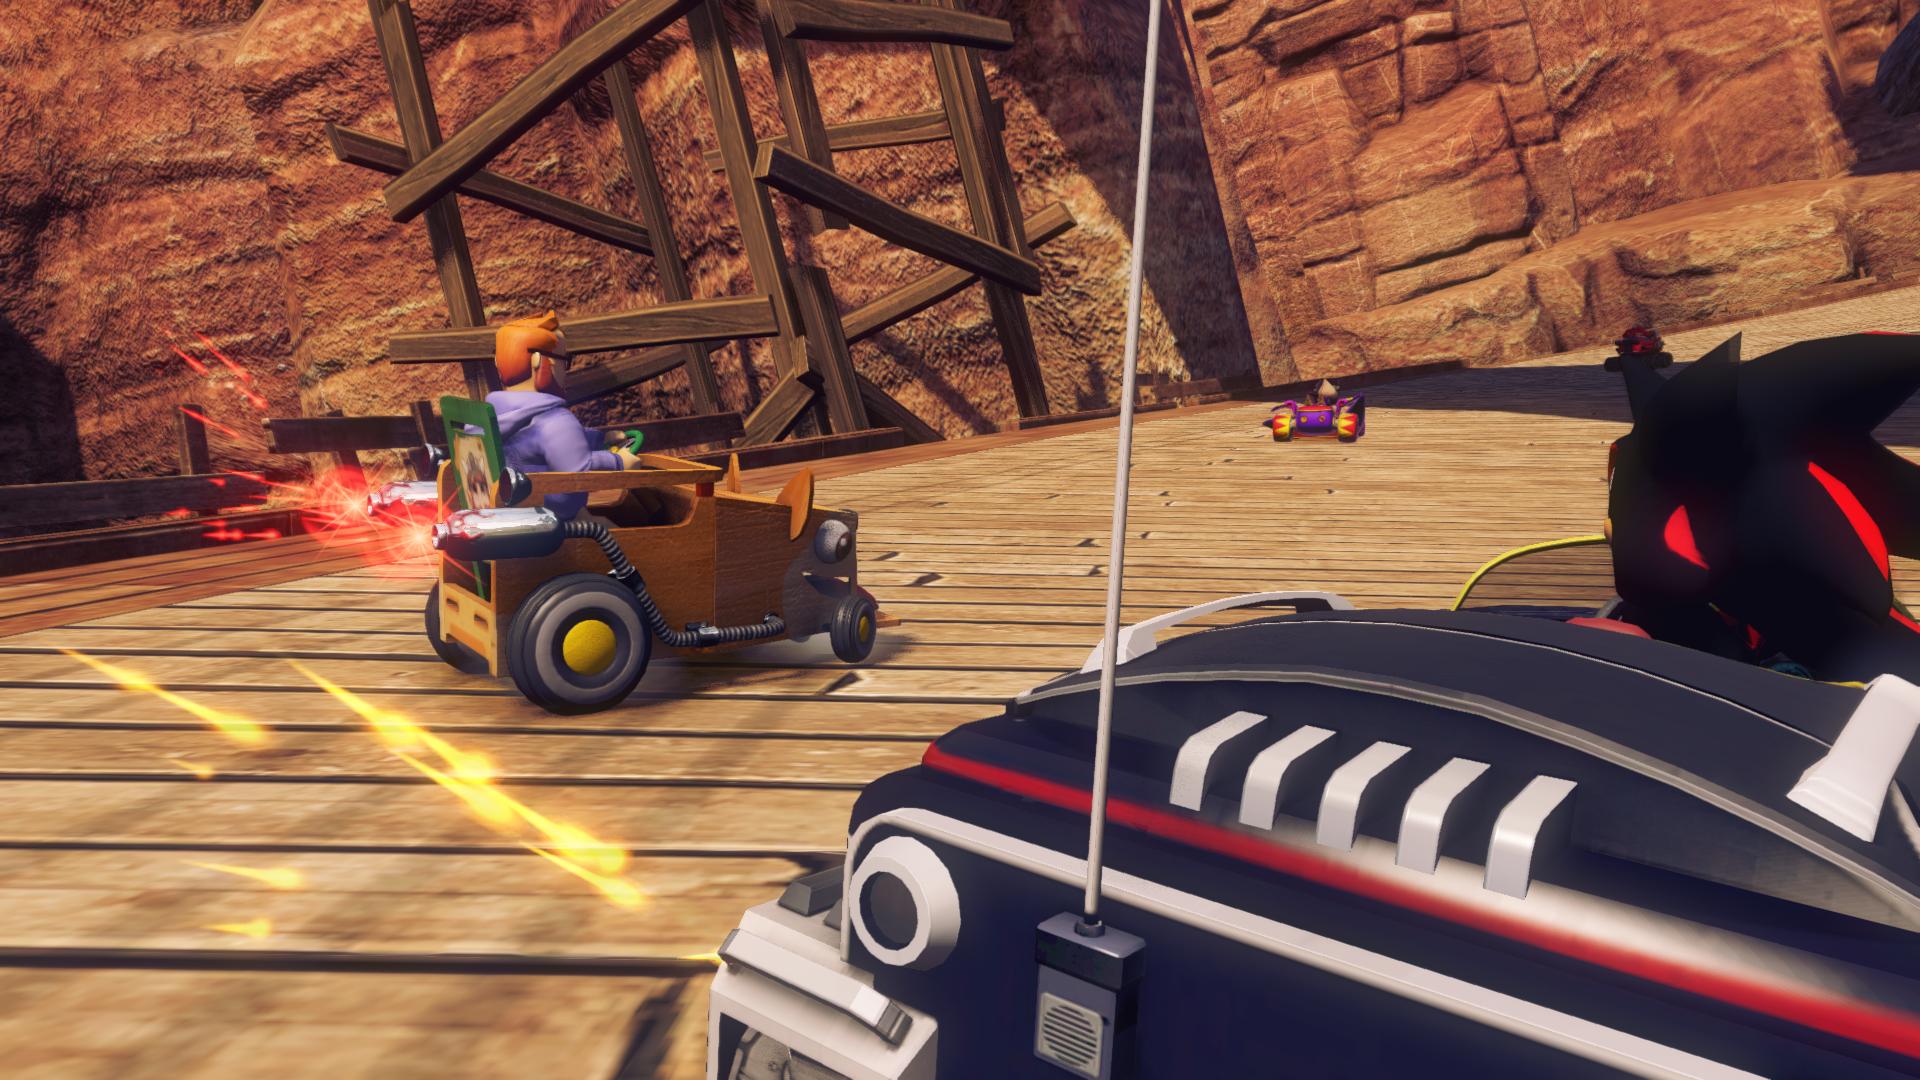 Sonic and All-Stars Racing Transformed - Yogscast DLC Steam Gift 51.92$